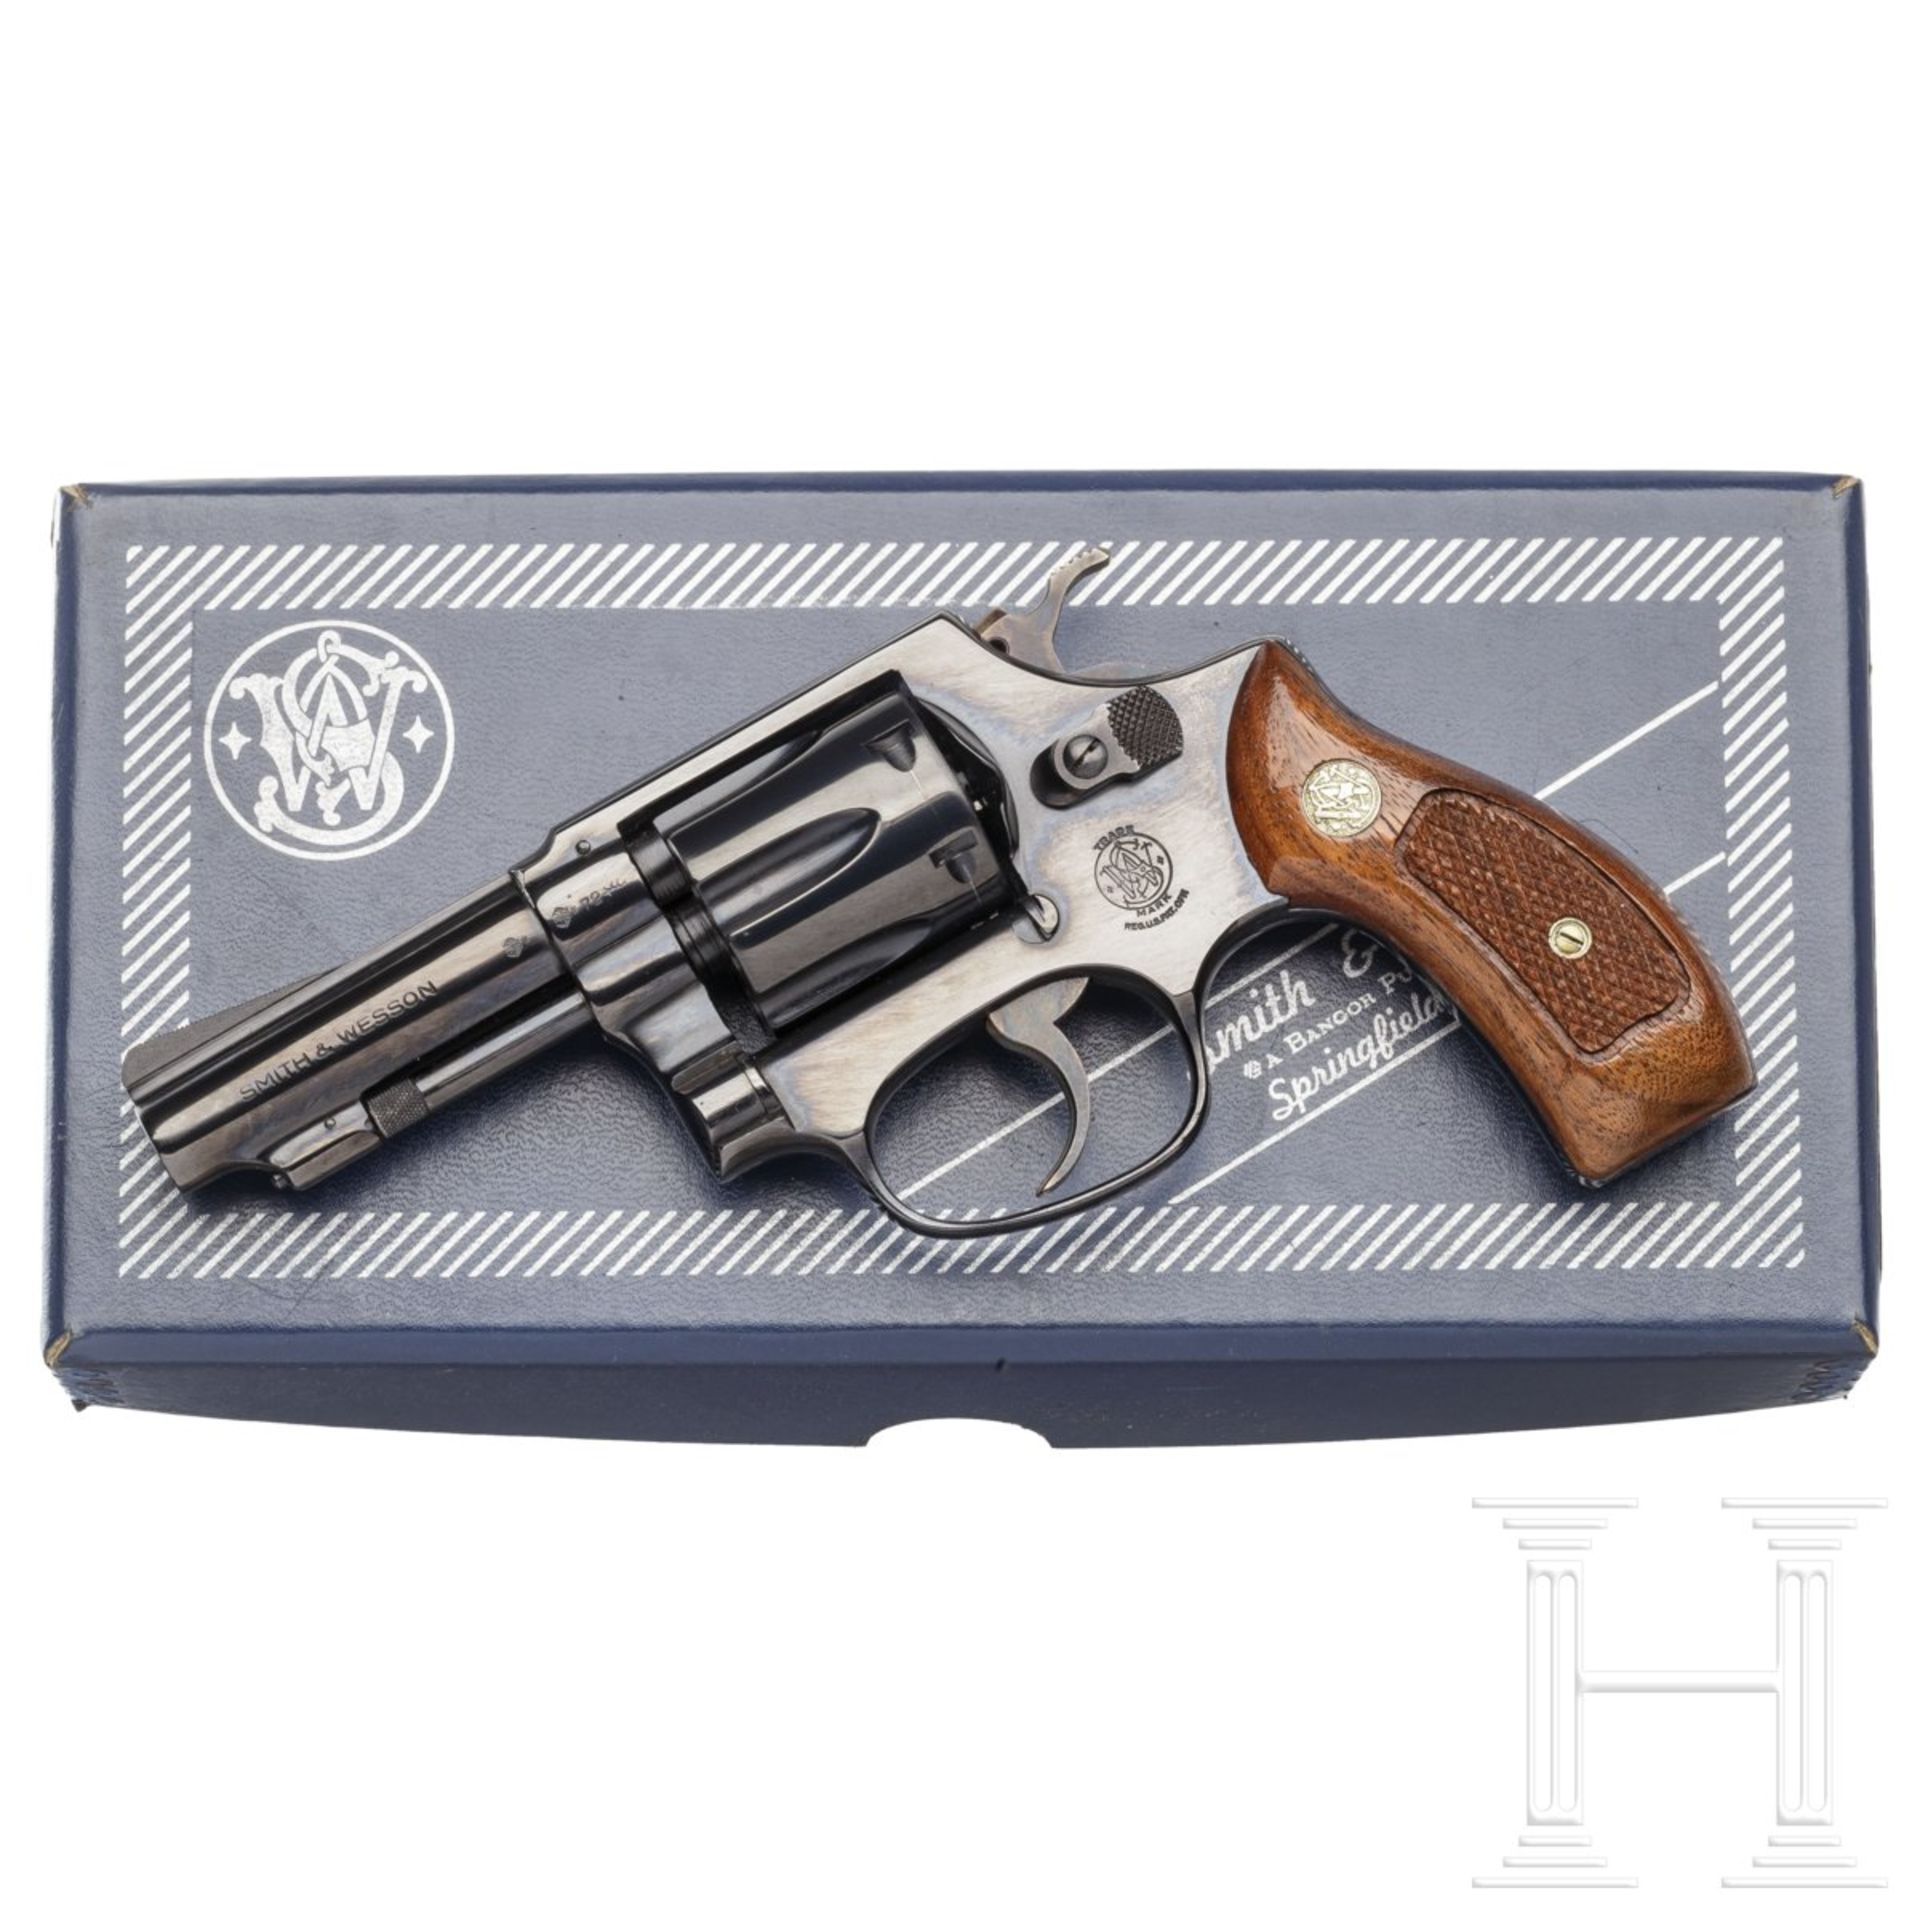 Smith & Wesson Mod. 30-1, "The .32 Hand Ejector", im Karton